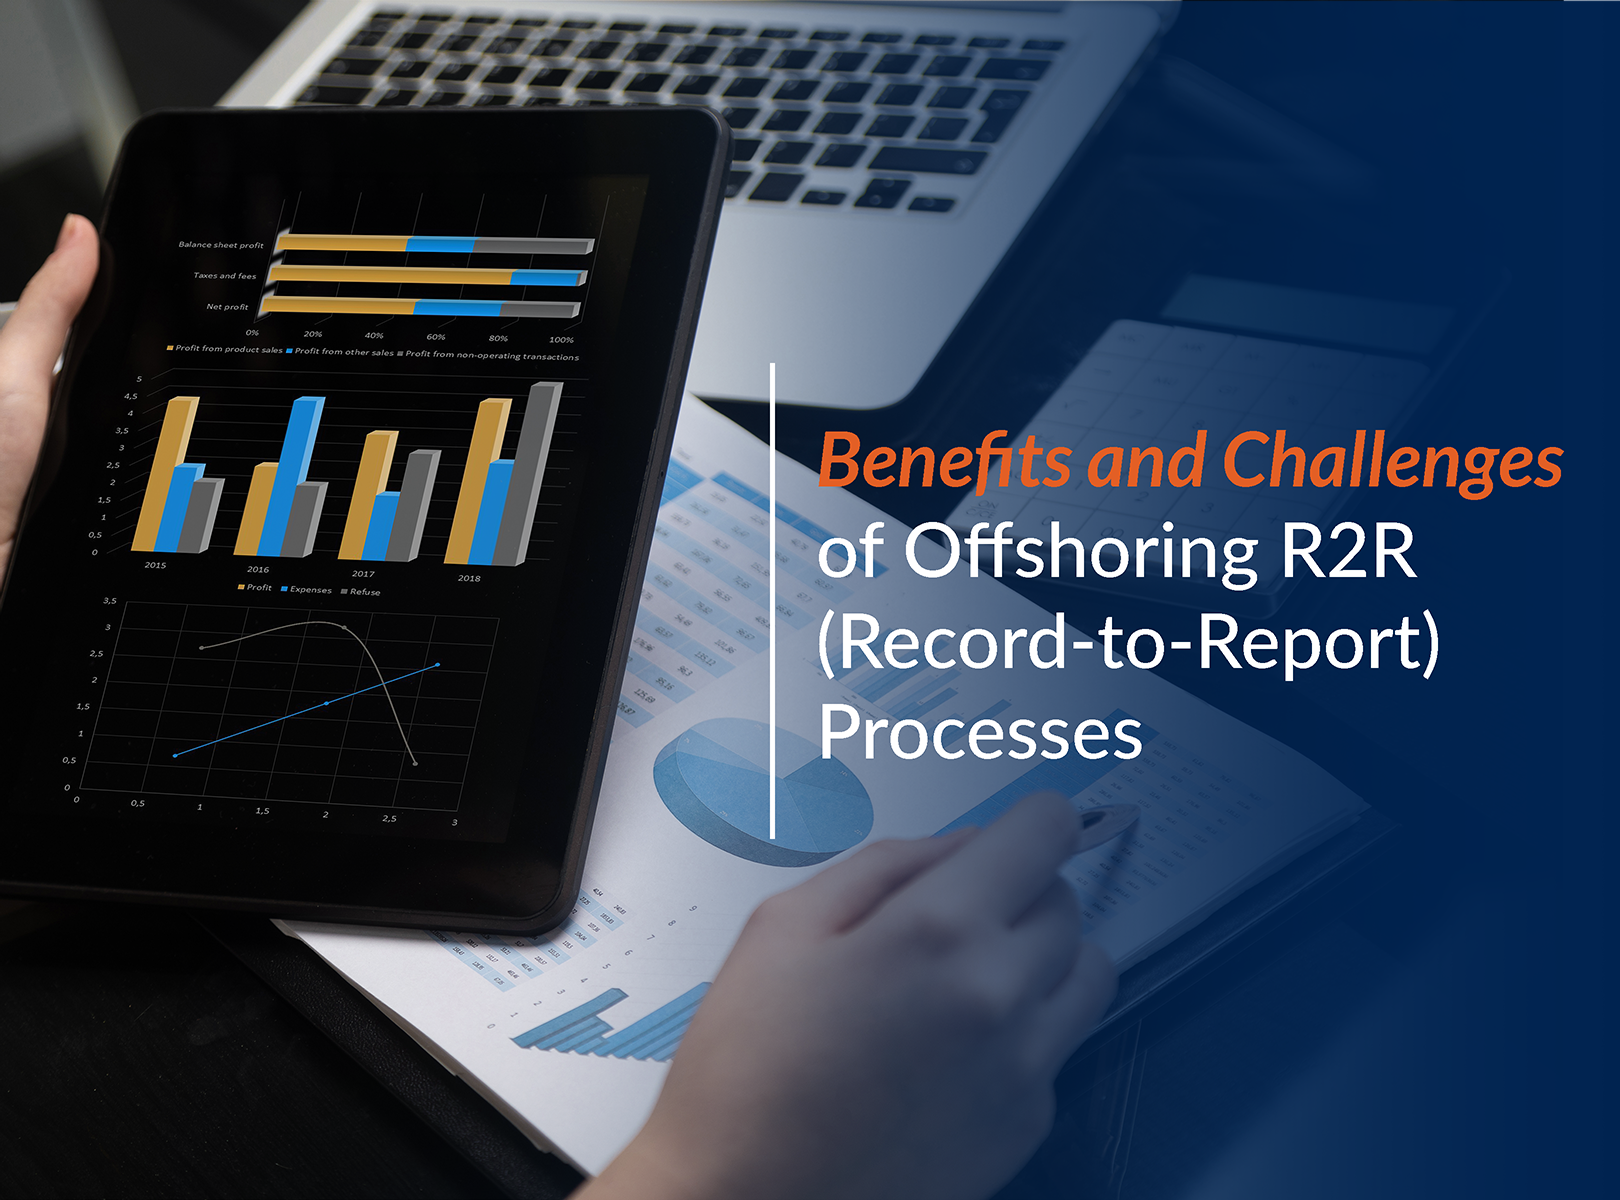 The Benefits and Challenges of Offshoring Record-to-Report